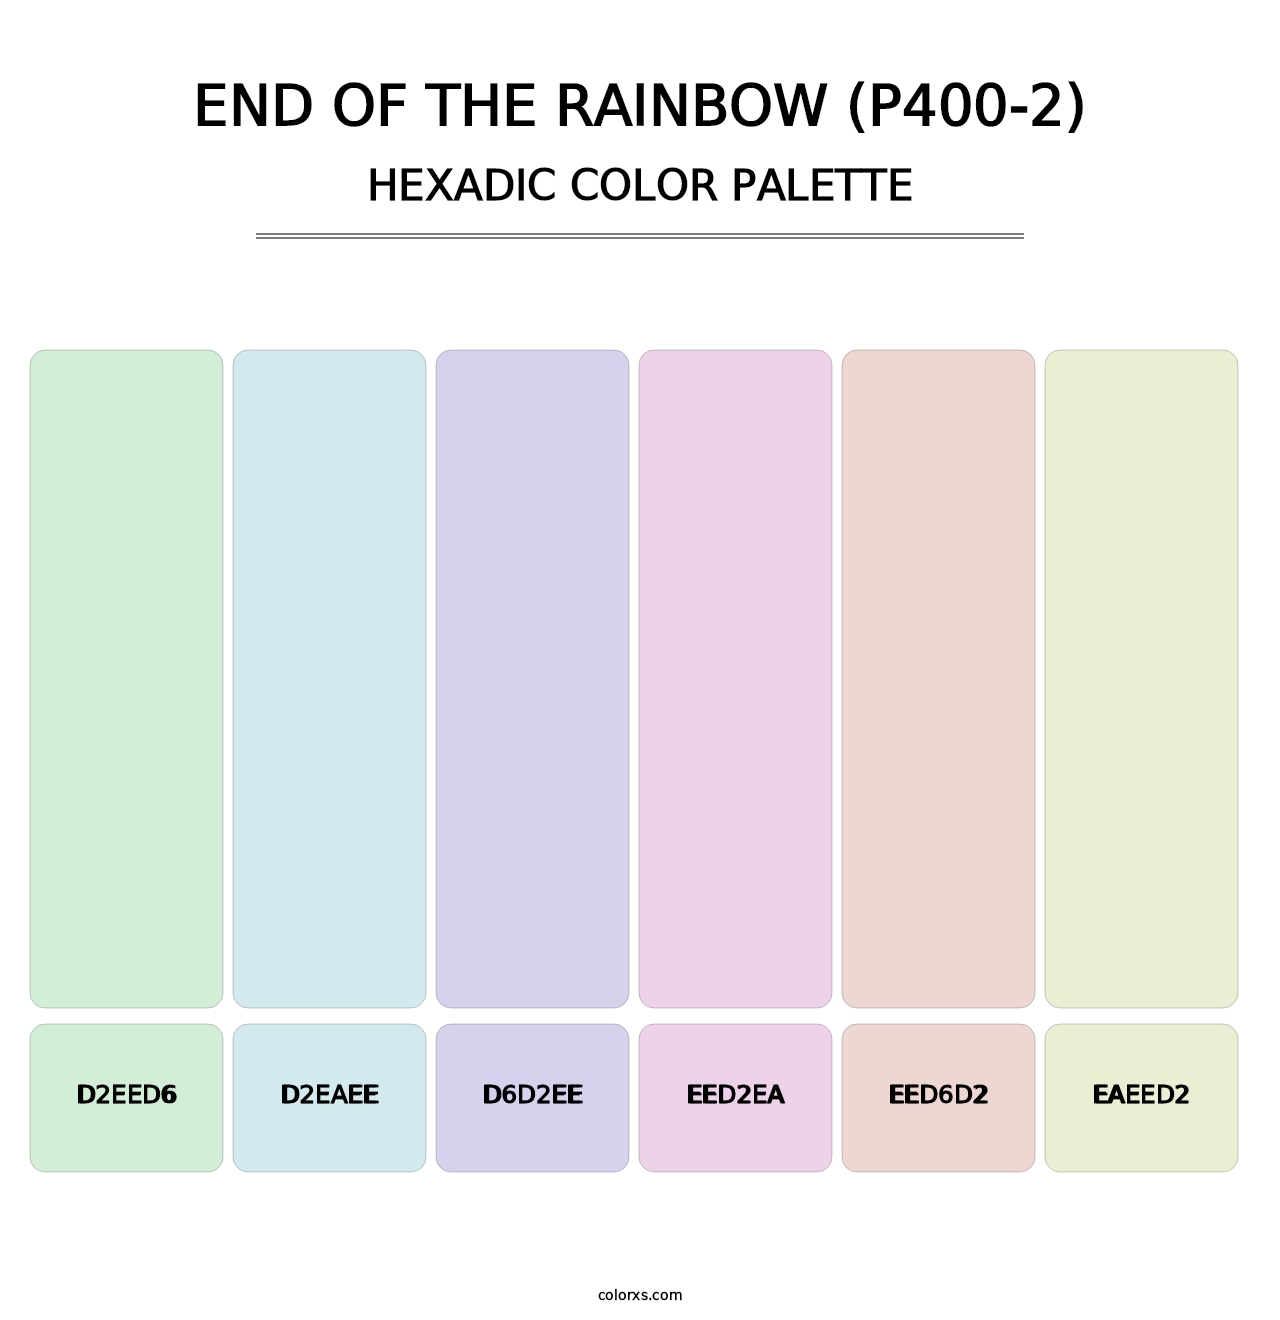 End Of The Rainbow (P400-2) - Hexadic Color Palette